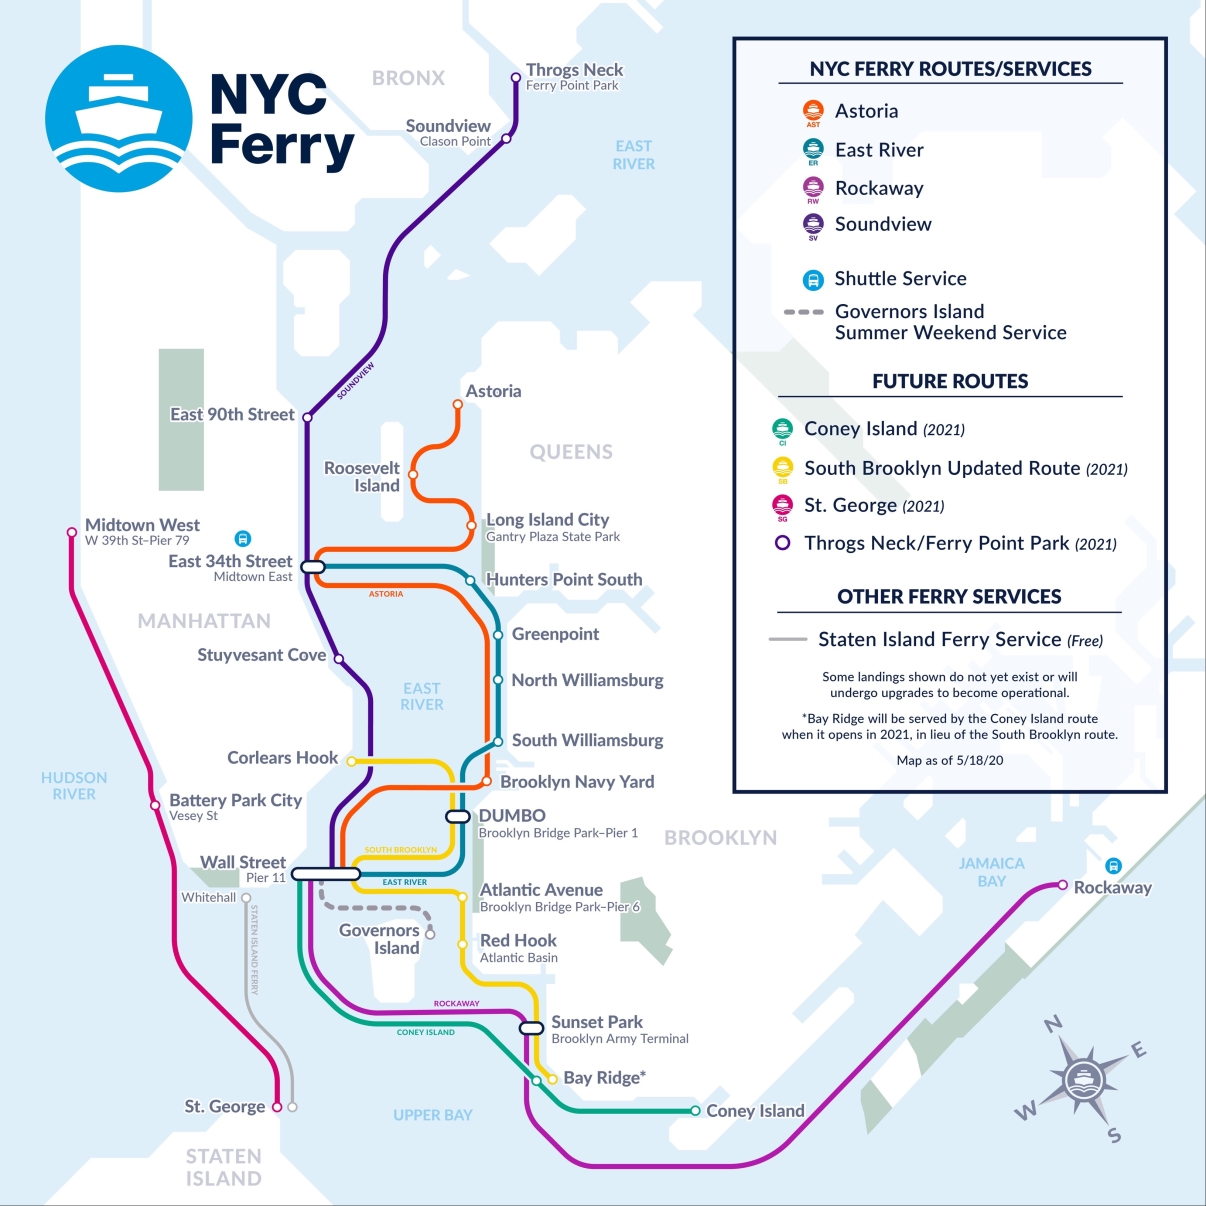 Press Release-NYC Ferry Changes-Image